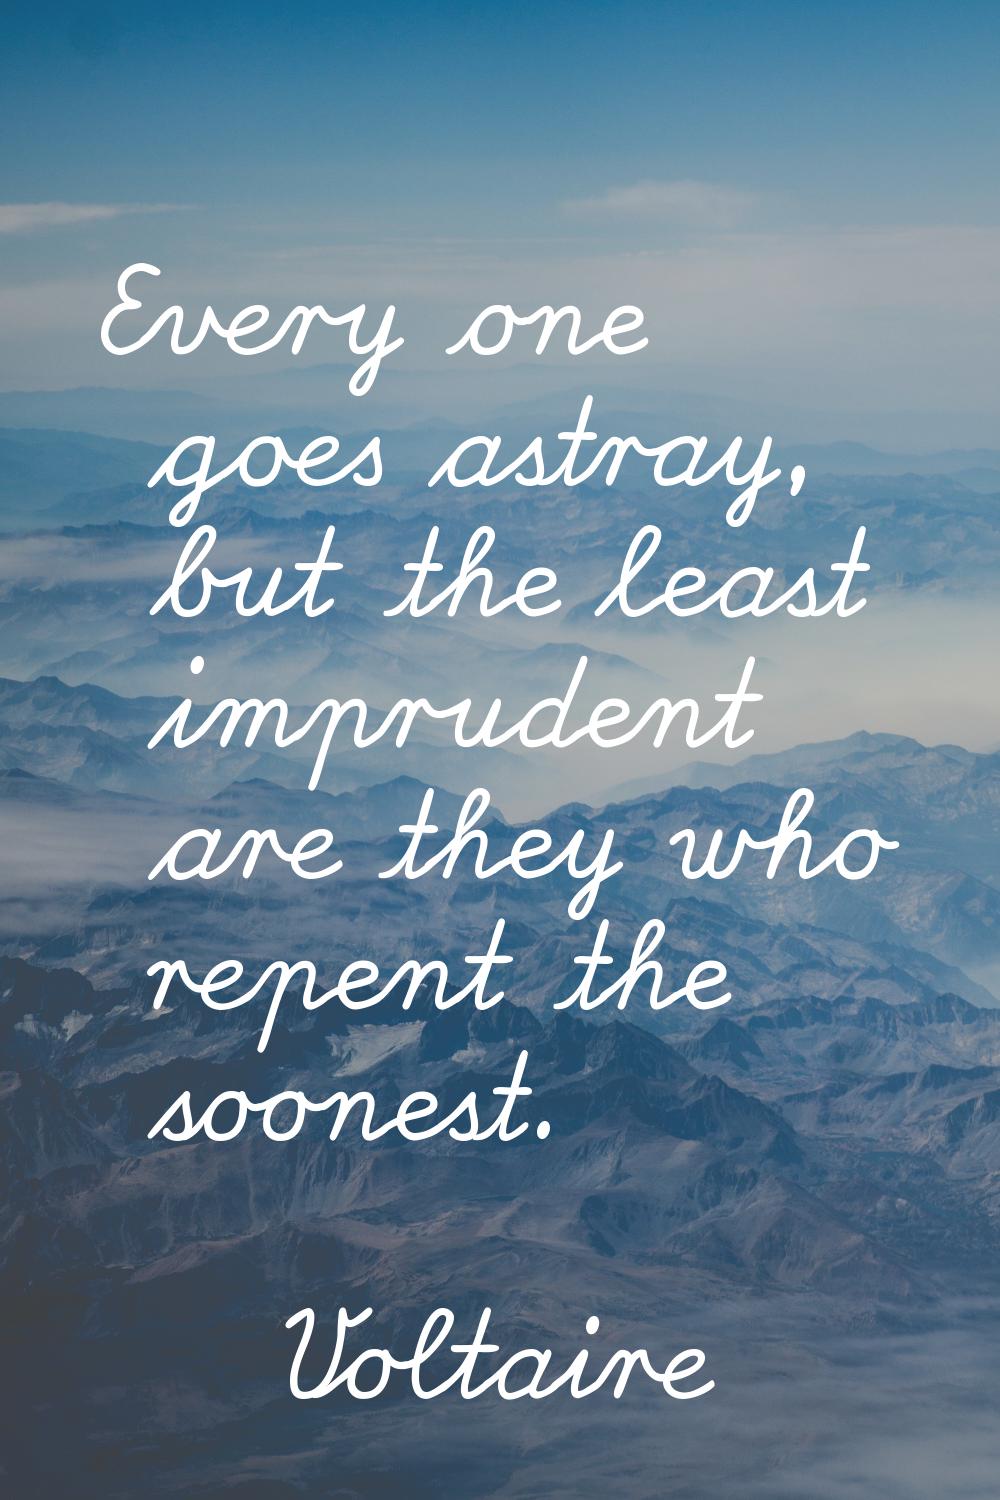 Every one goes astray, but the least imprudent are they who repent the soonest.